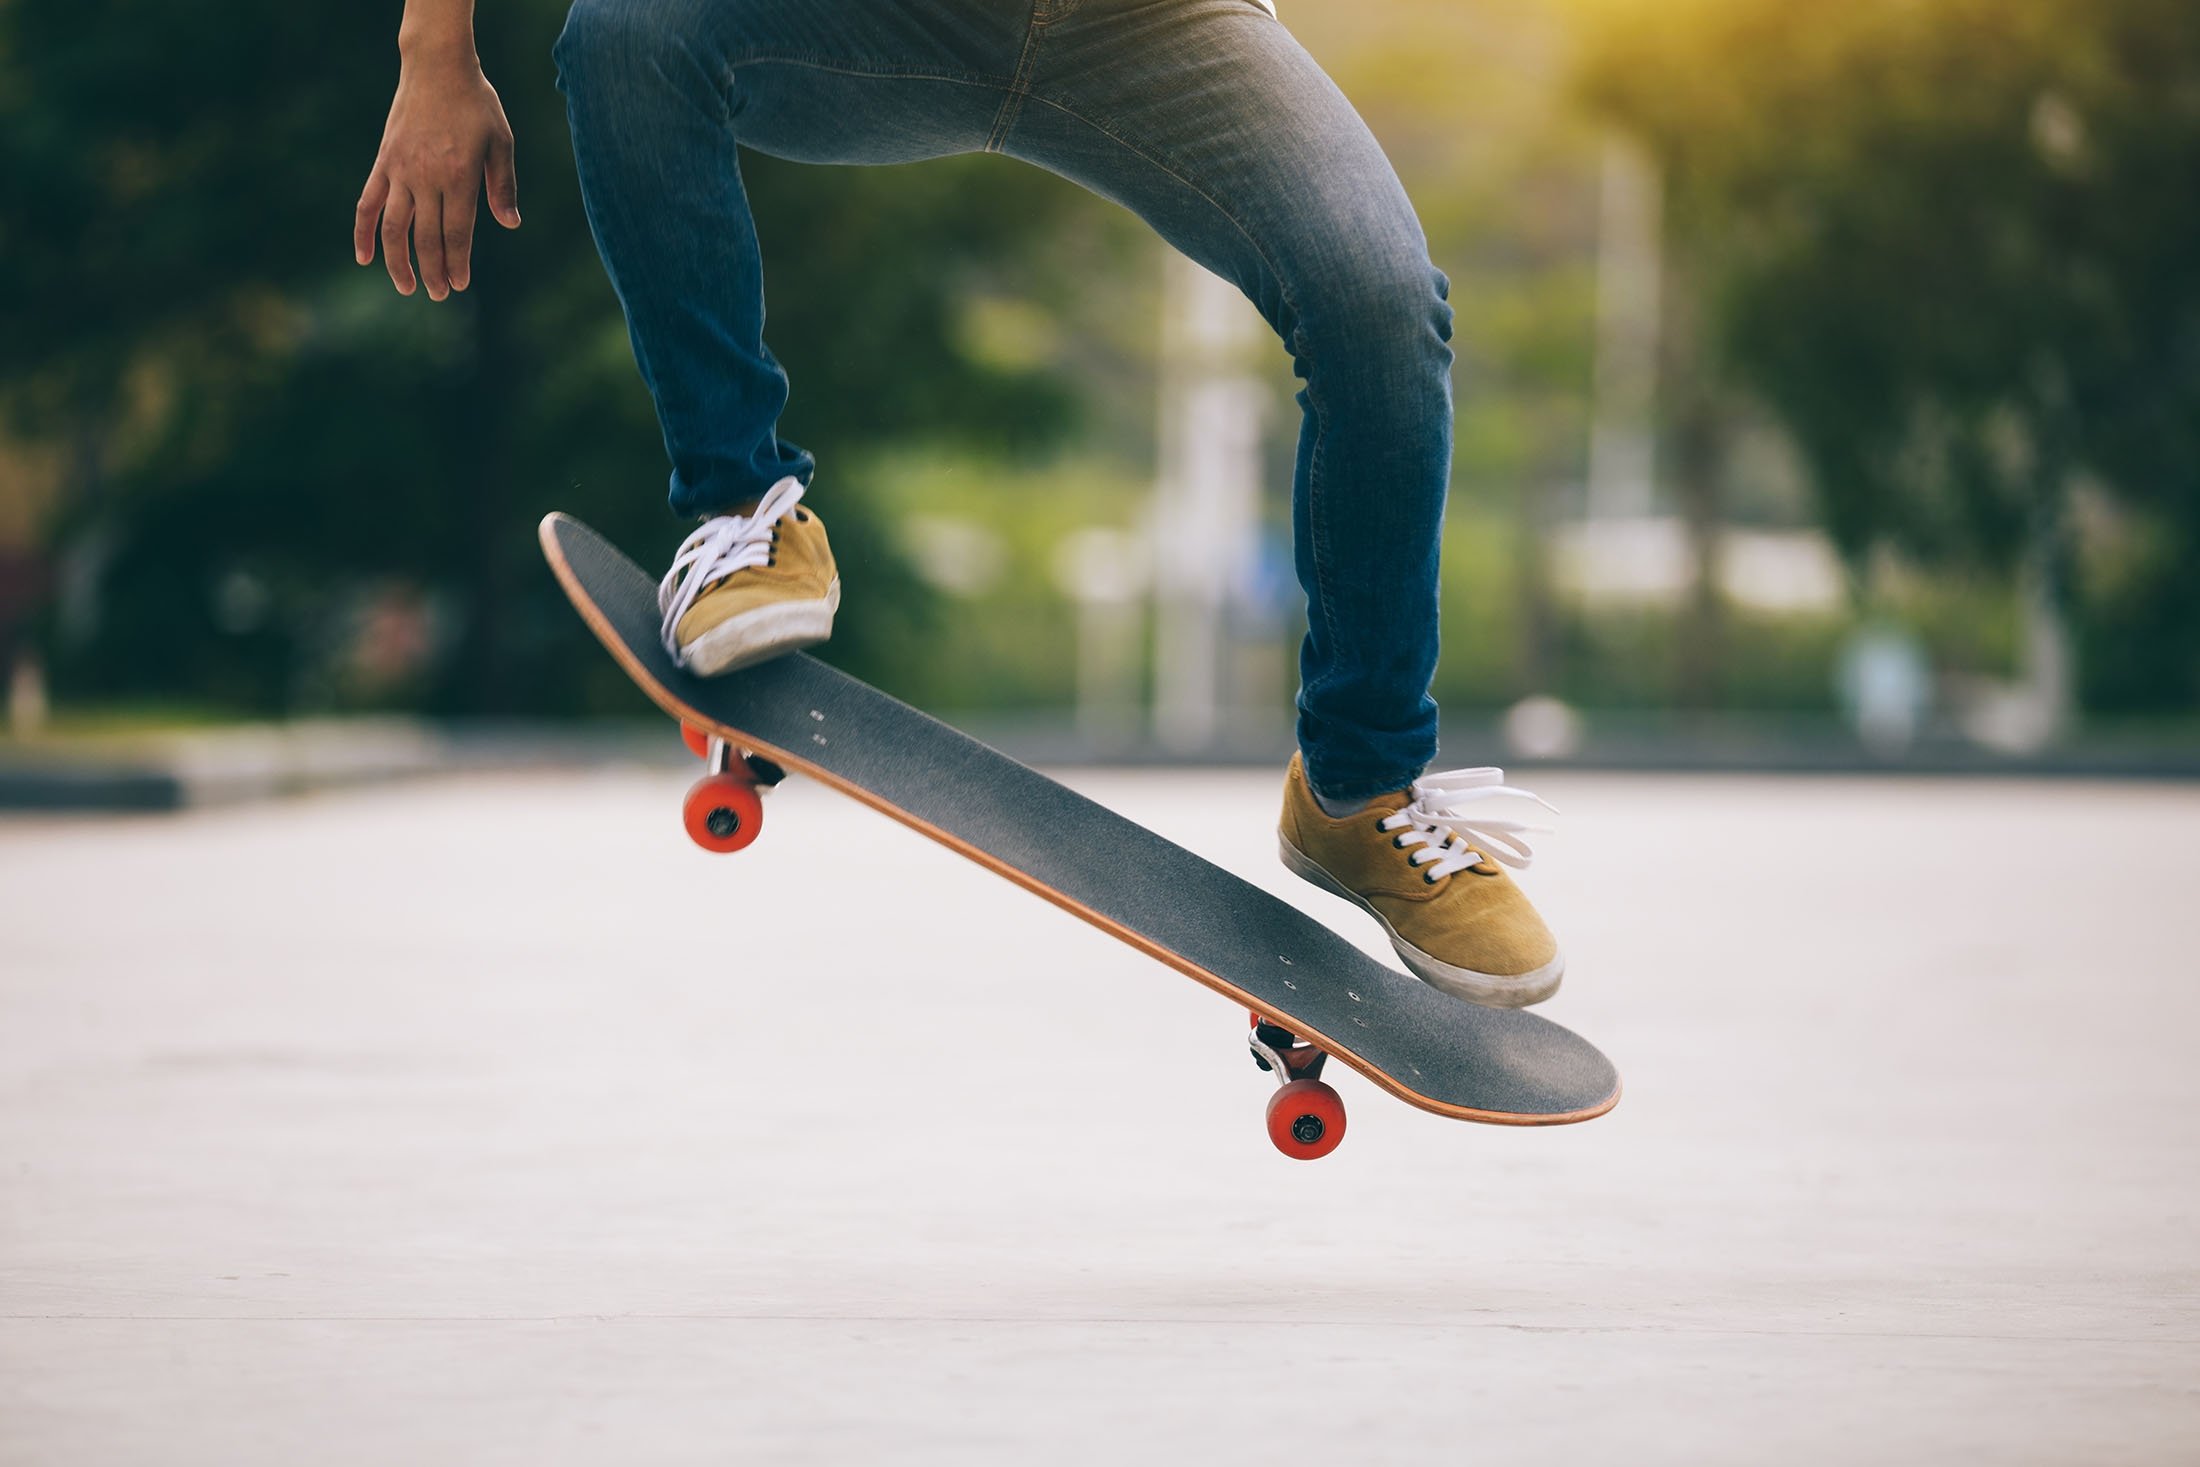 Skateboarding was invented in late 20th century by attaching wheels to wooden blocks. (Shutterstock Photo)